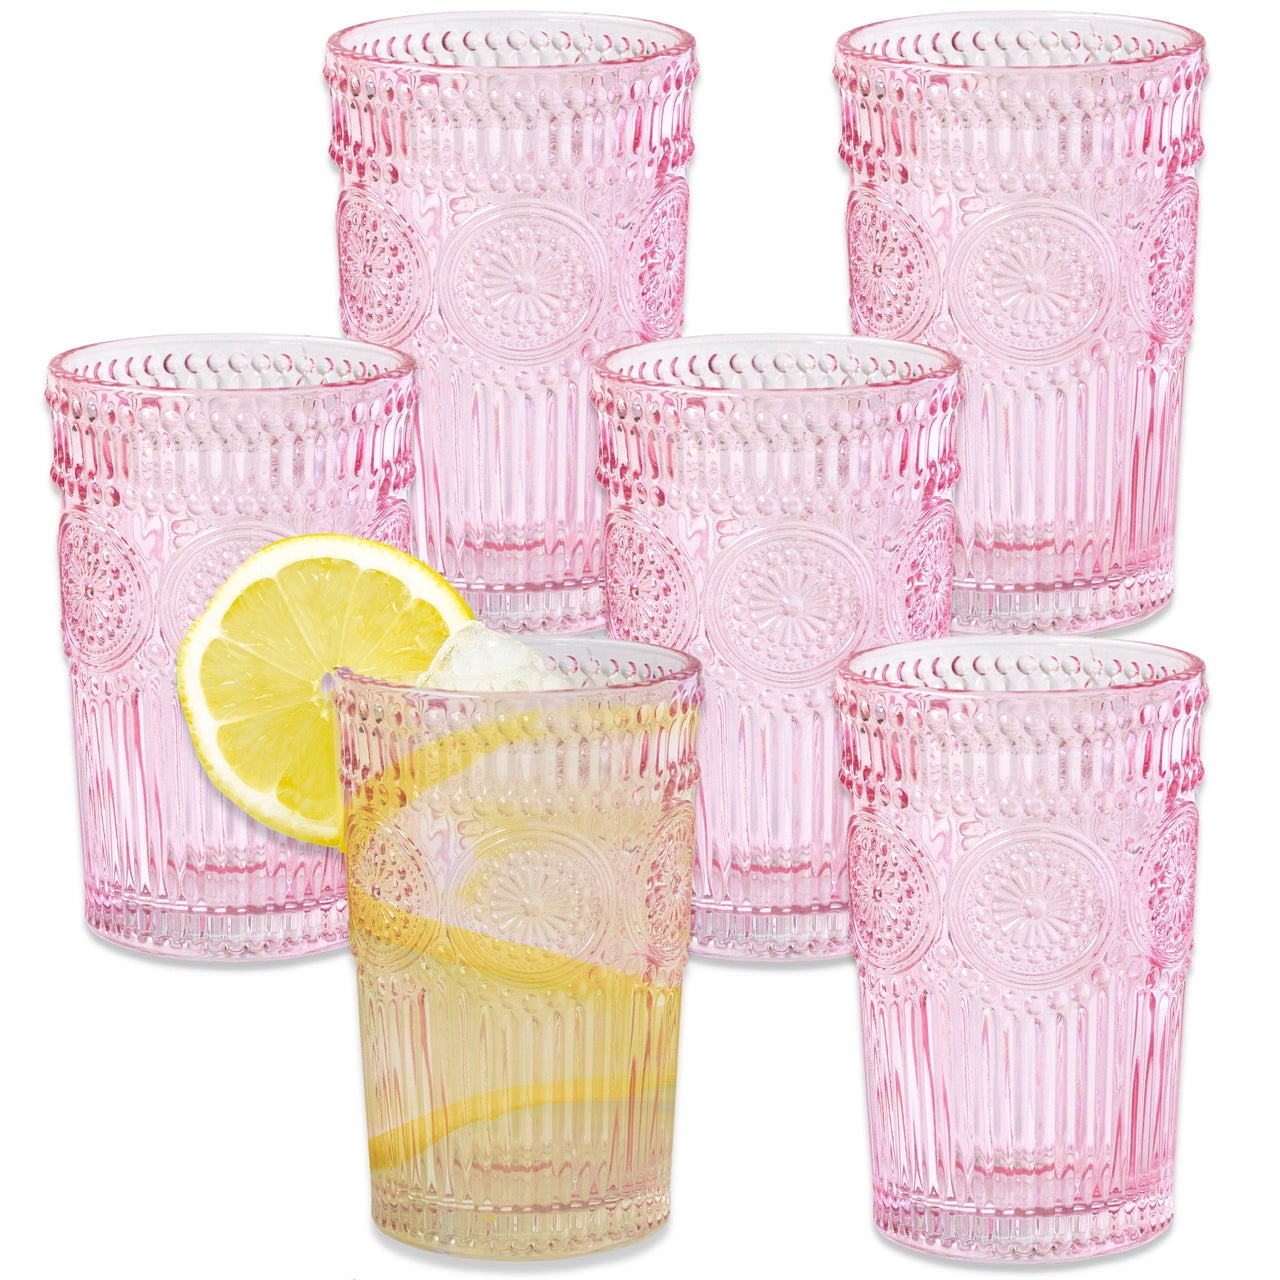 CWHHRN 16Oz Glass Cups, 6Set Ribbed Drinking Glasses with Lids and Straws,  Vintage Glassware for Whi…See more CWHHRN 16Oz Glass Cups, 6Set Ribbed